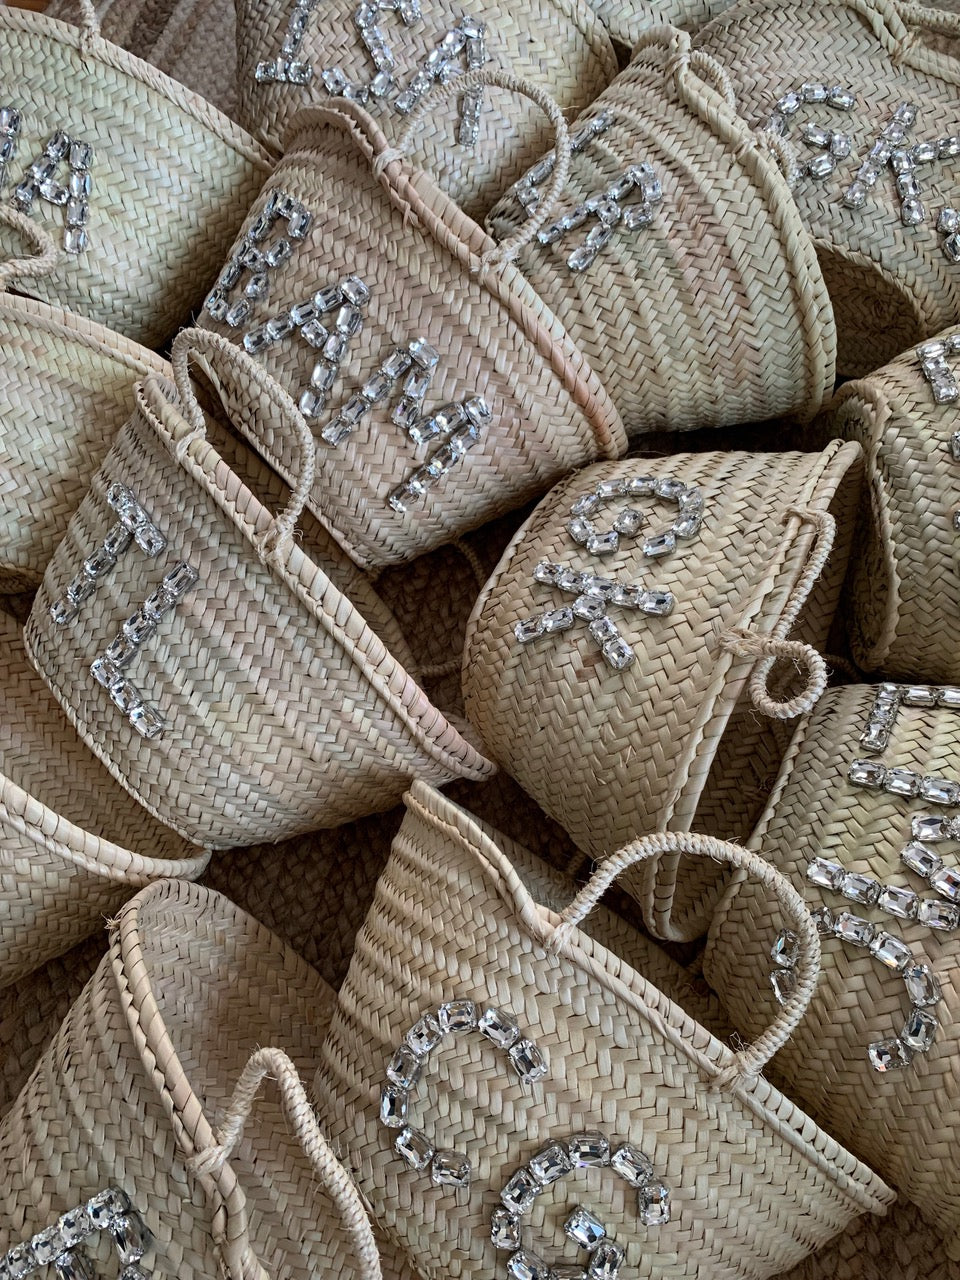 Independence Logo On Straw Bags - Our News